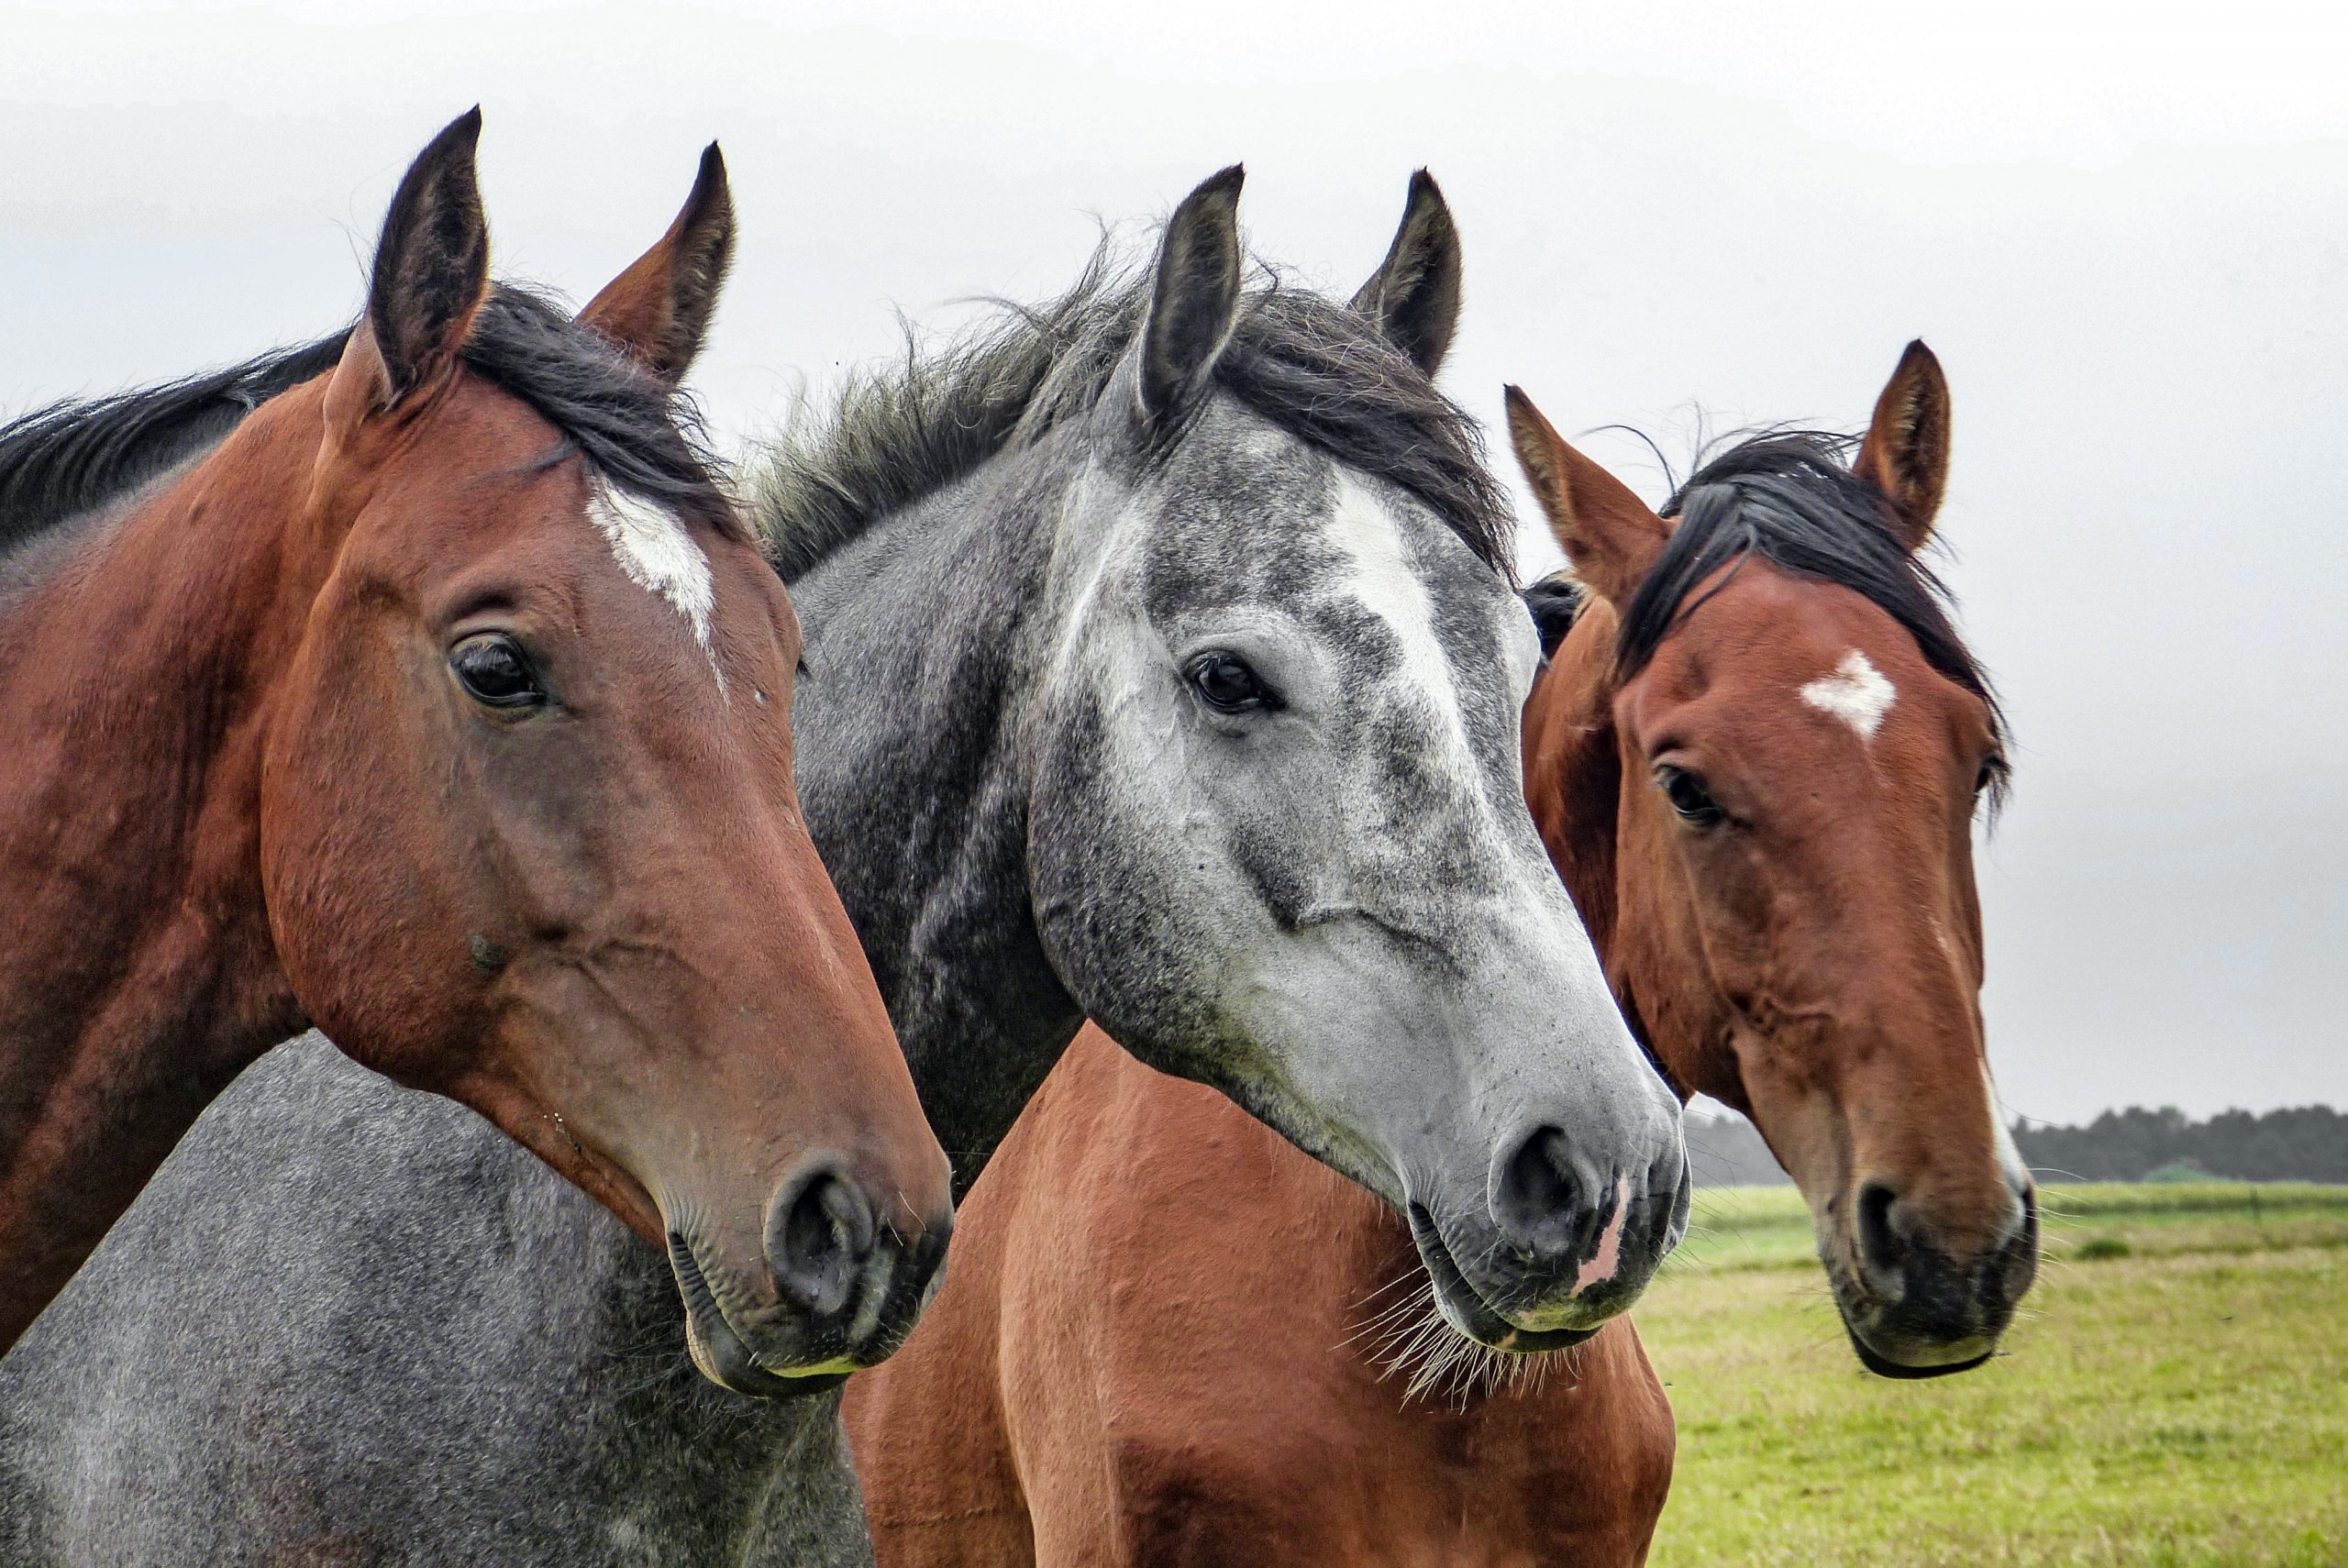 Essential Oils and Your Horse